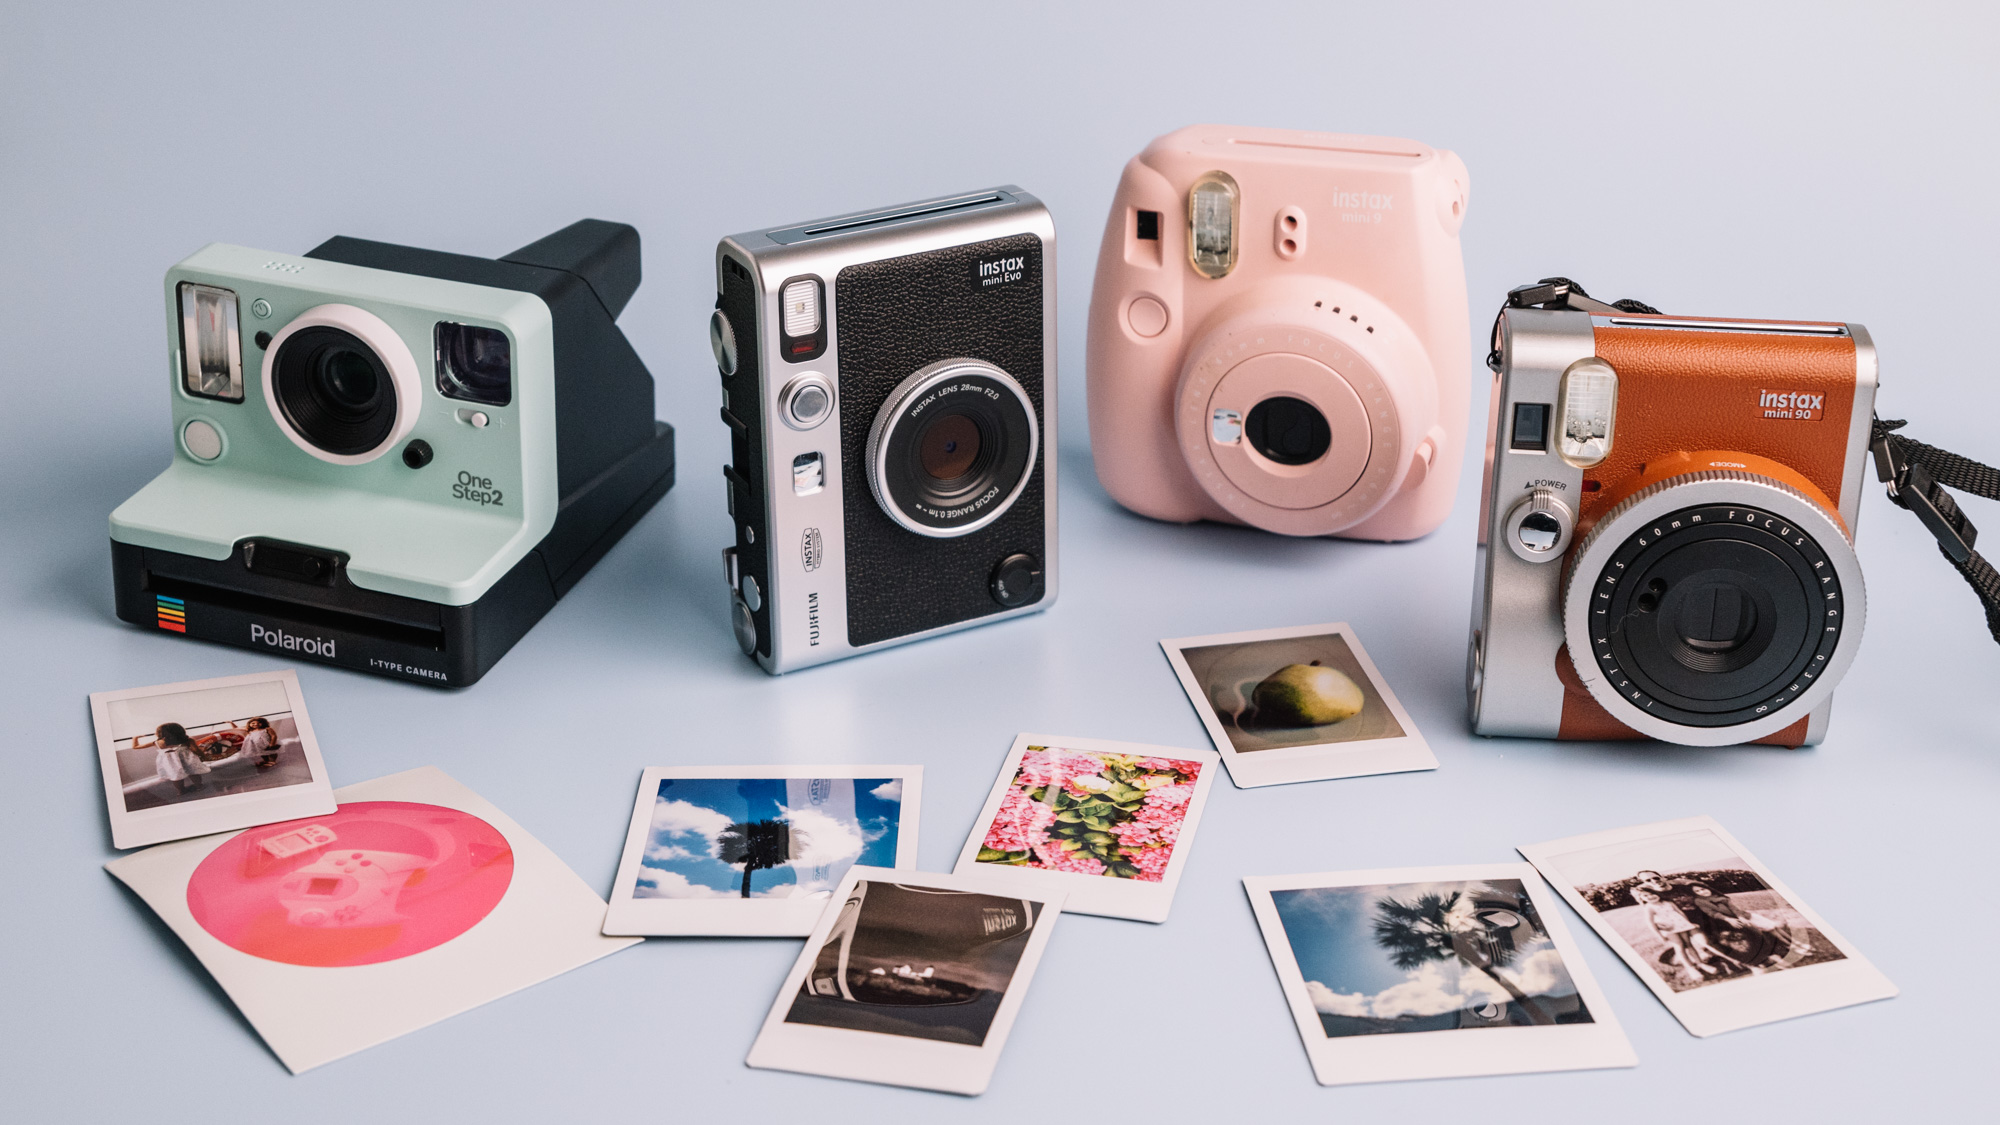 Luchtpost Komkommer Peer Fuji Instax and Polaroid Instant Camera Buyer's Guide! - Casual Photophile